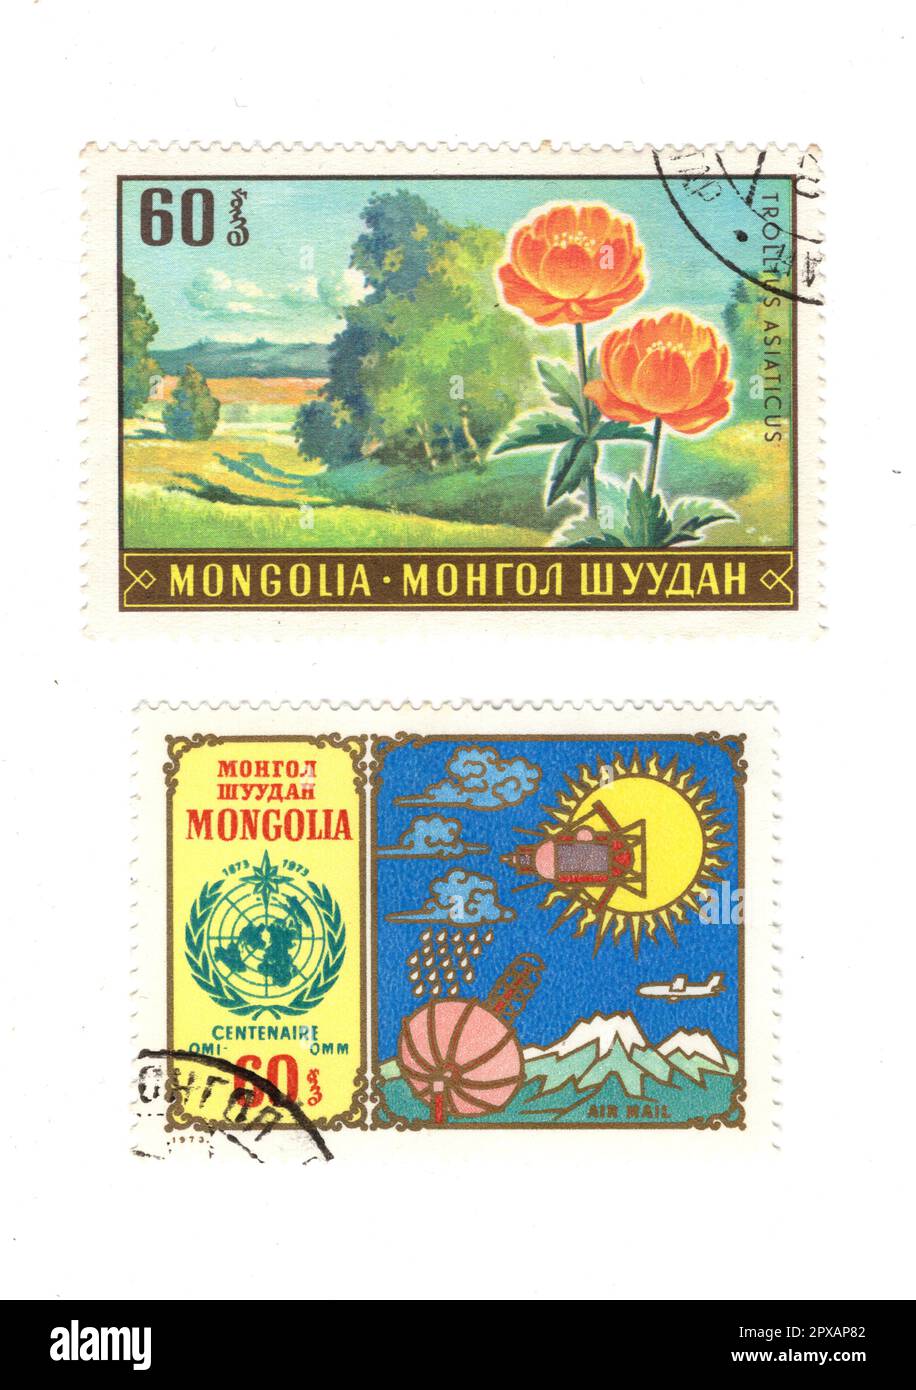 Vintage postage stamps from Mongolia isolated on a white background. Stock Photo